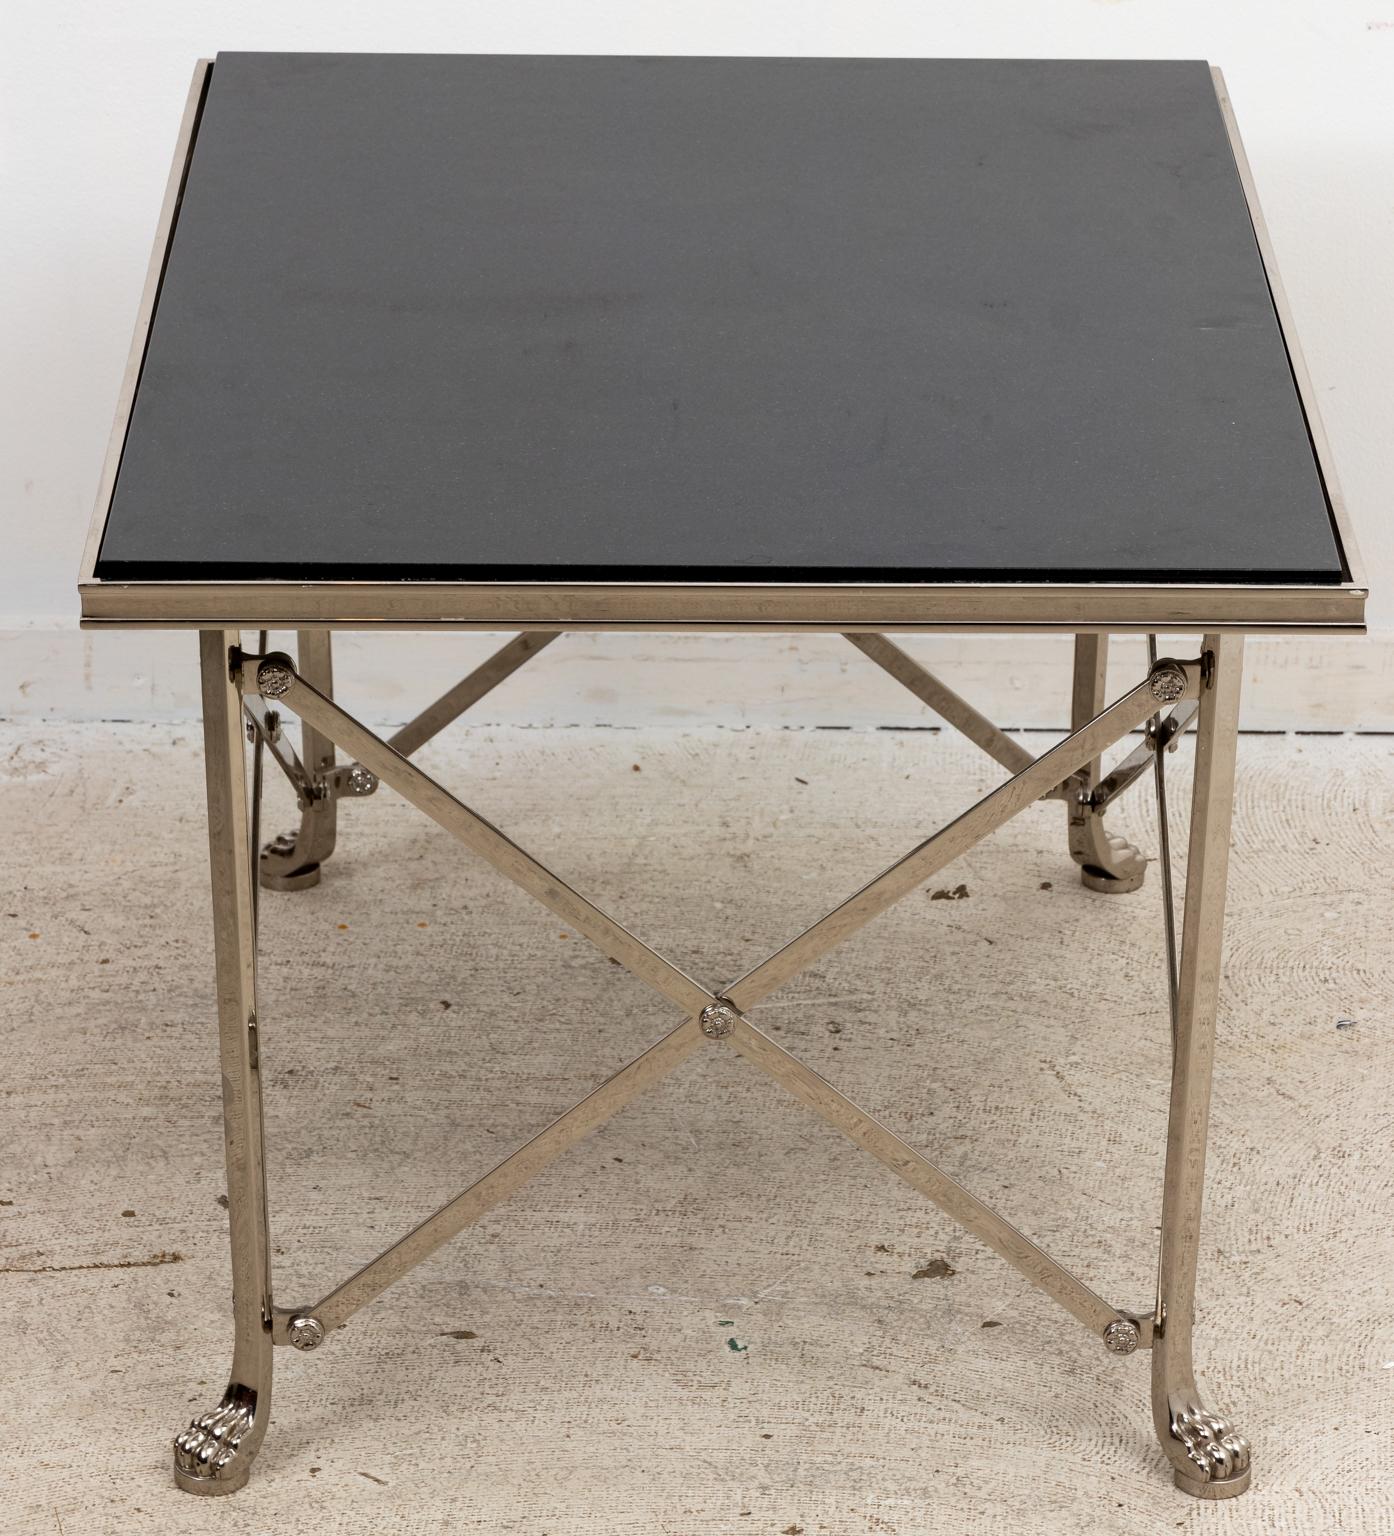 Contemporary granite top tea table on a polished metal x-frame base with lion's paw feet. The table's base is further embellished with rosette medallions. Please note of wear consistent with age including patina to the granite tabletop and metal.